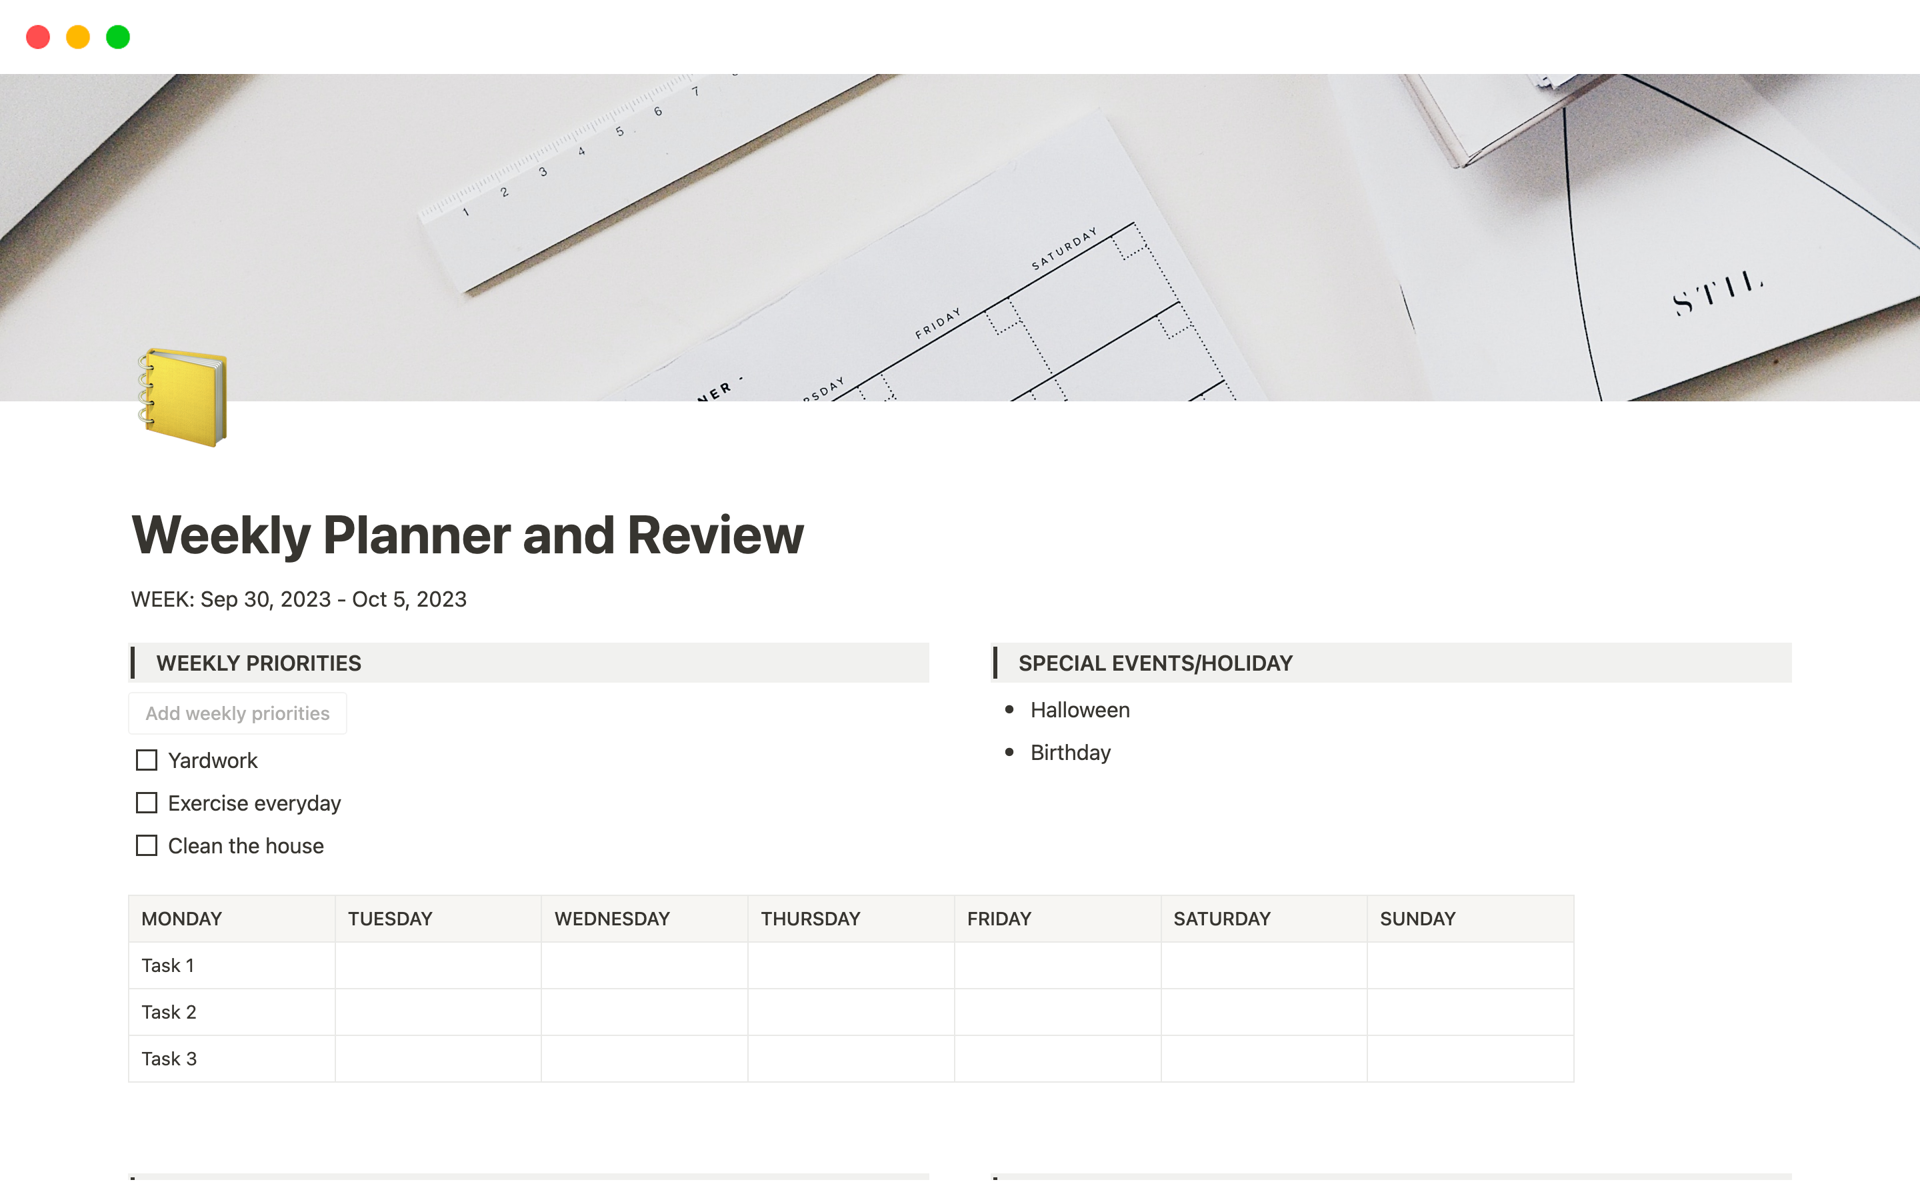 A weekly planner and review system combines structured scheduling and reflection, helping you manage your time effectively, align your actions with your goals, and continuously improve.